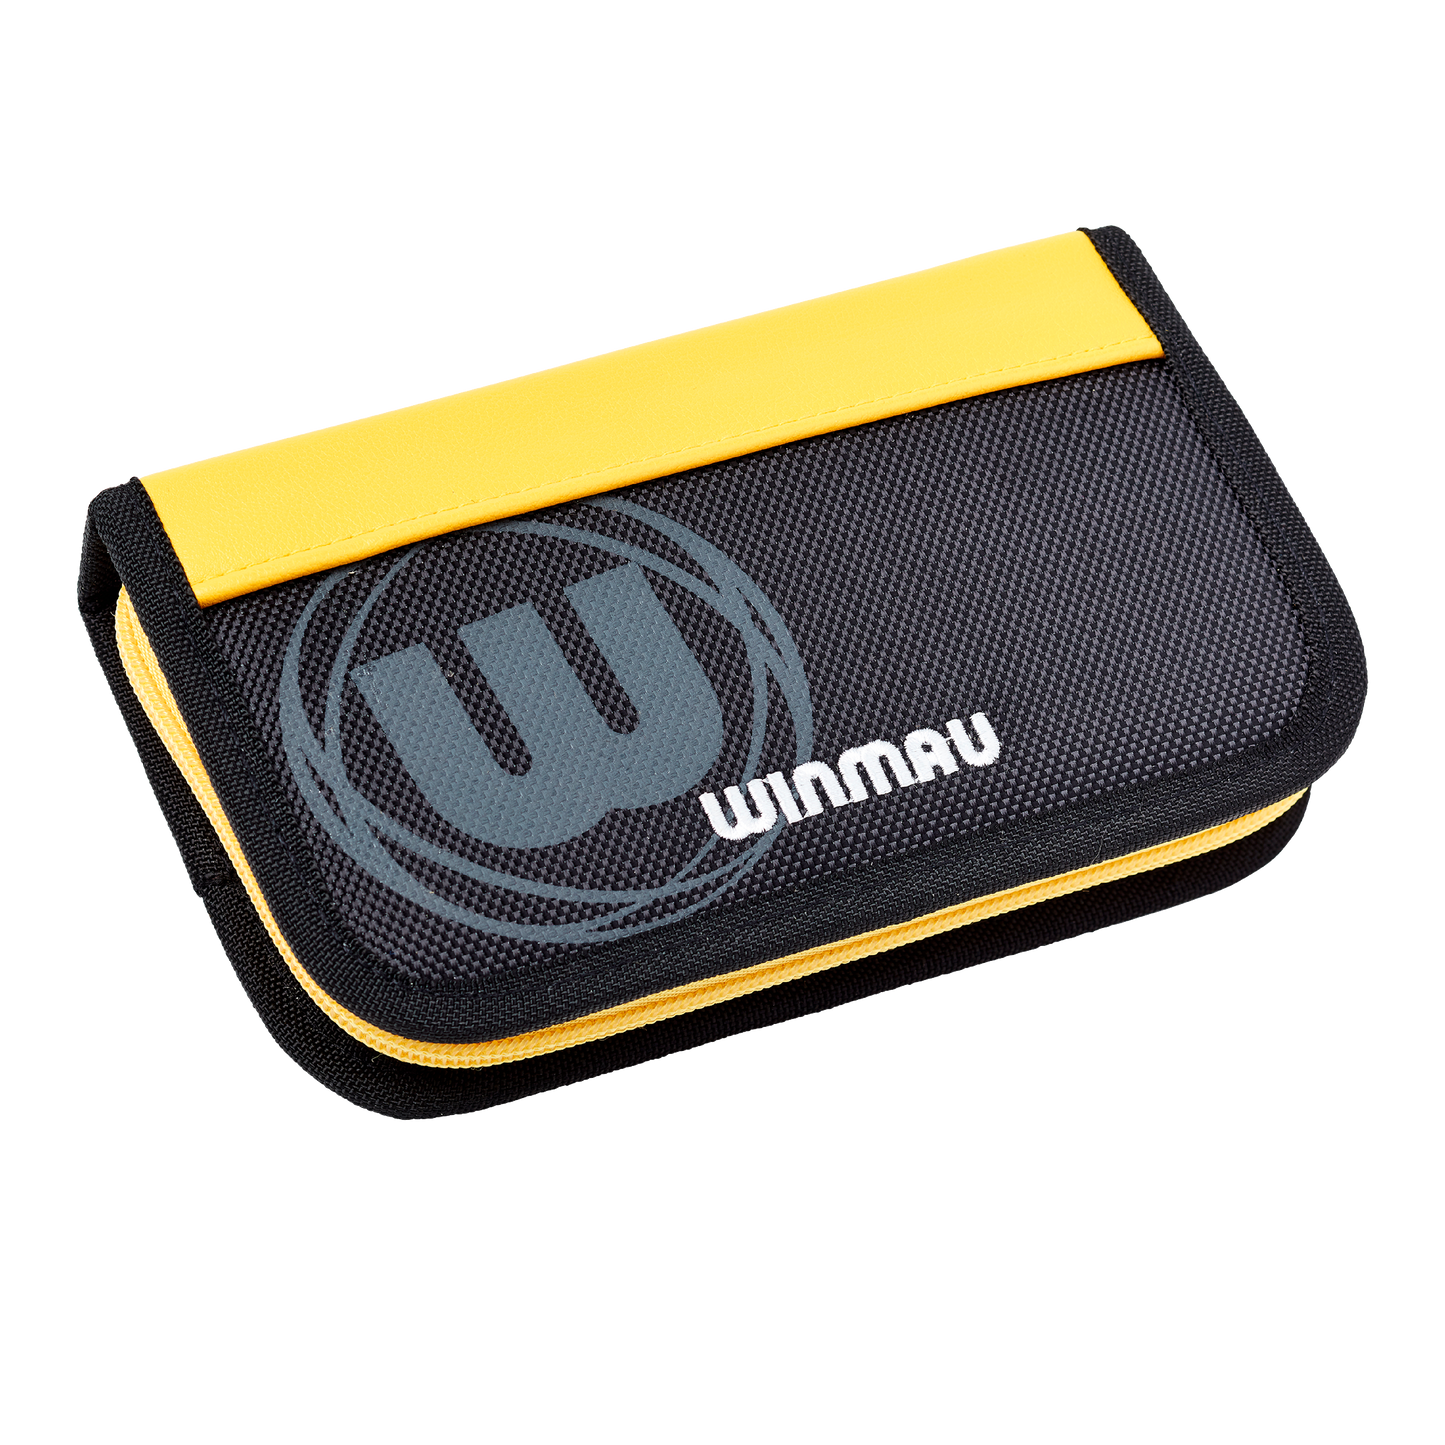 Winmau Urban Pro Dart Wallet - 4 Colors Available